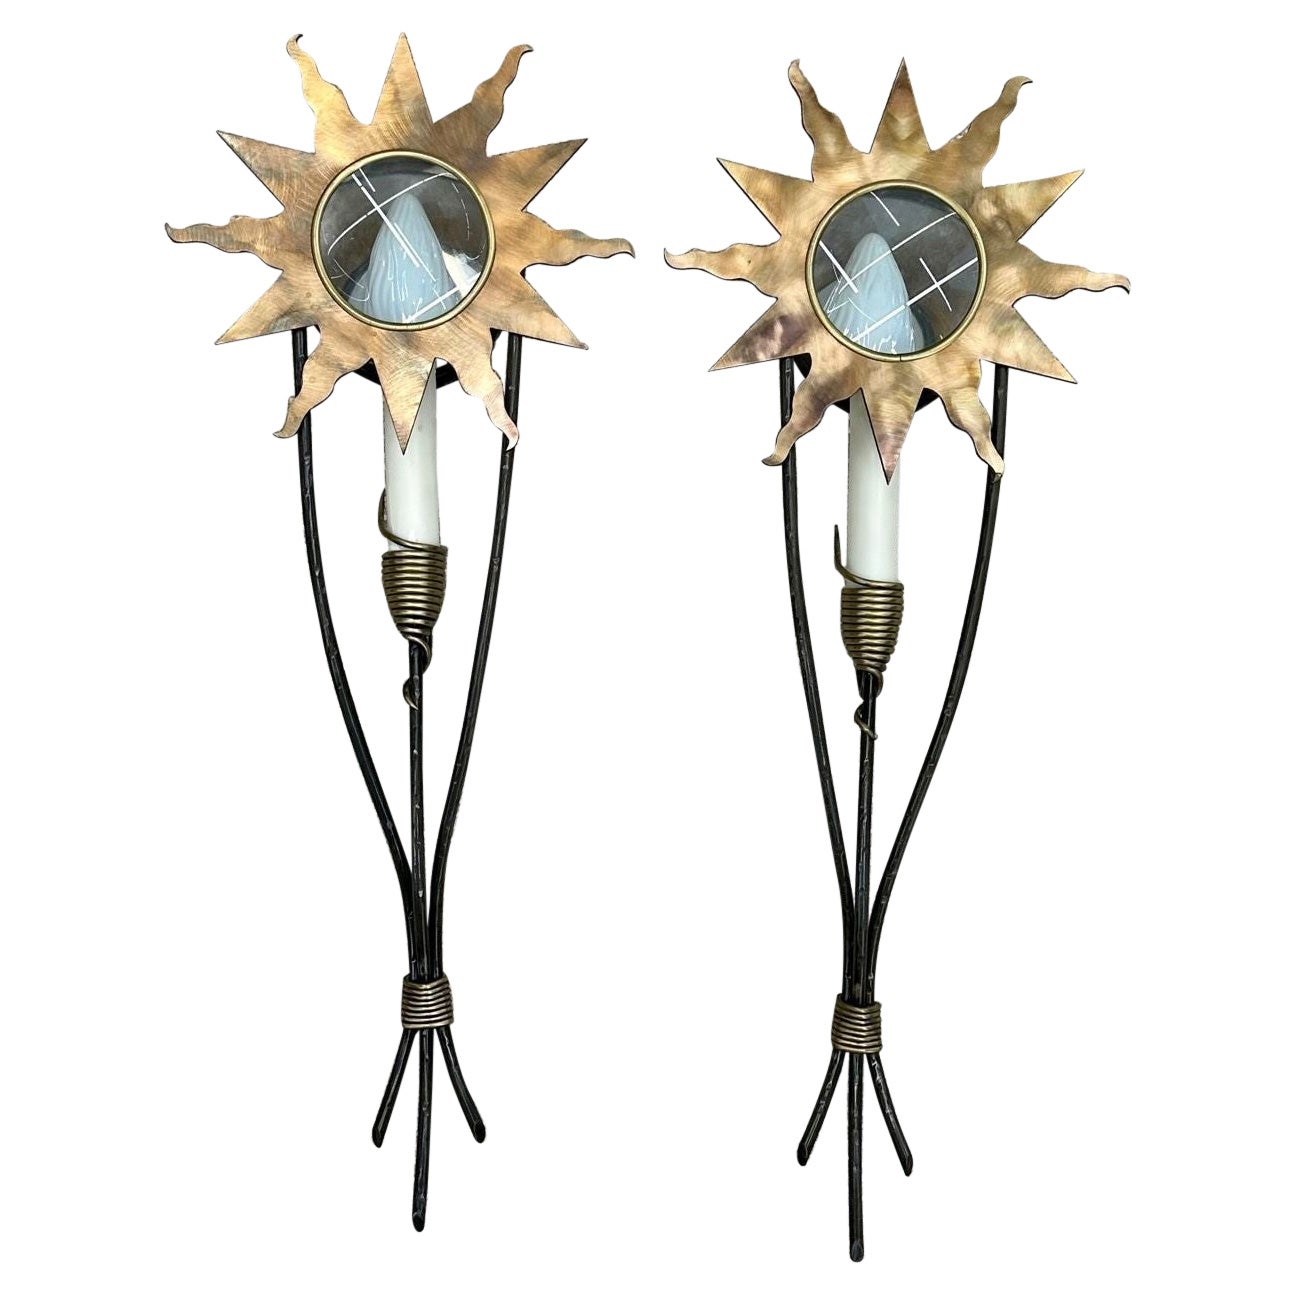 Pair of Mid Century Modern Brass / Copper Star Sconces, Olympia, Hand Hammered